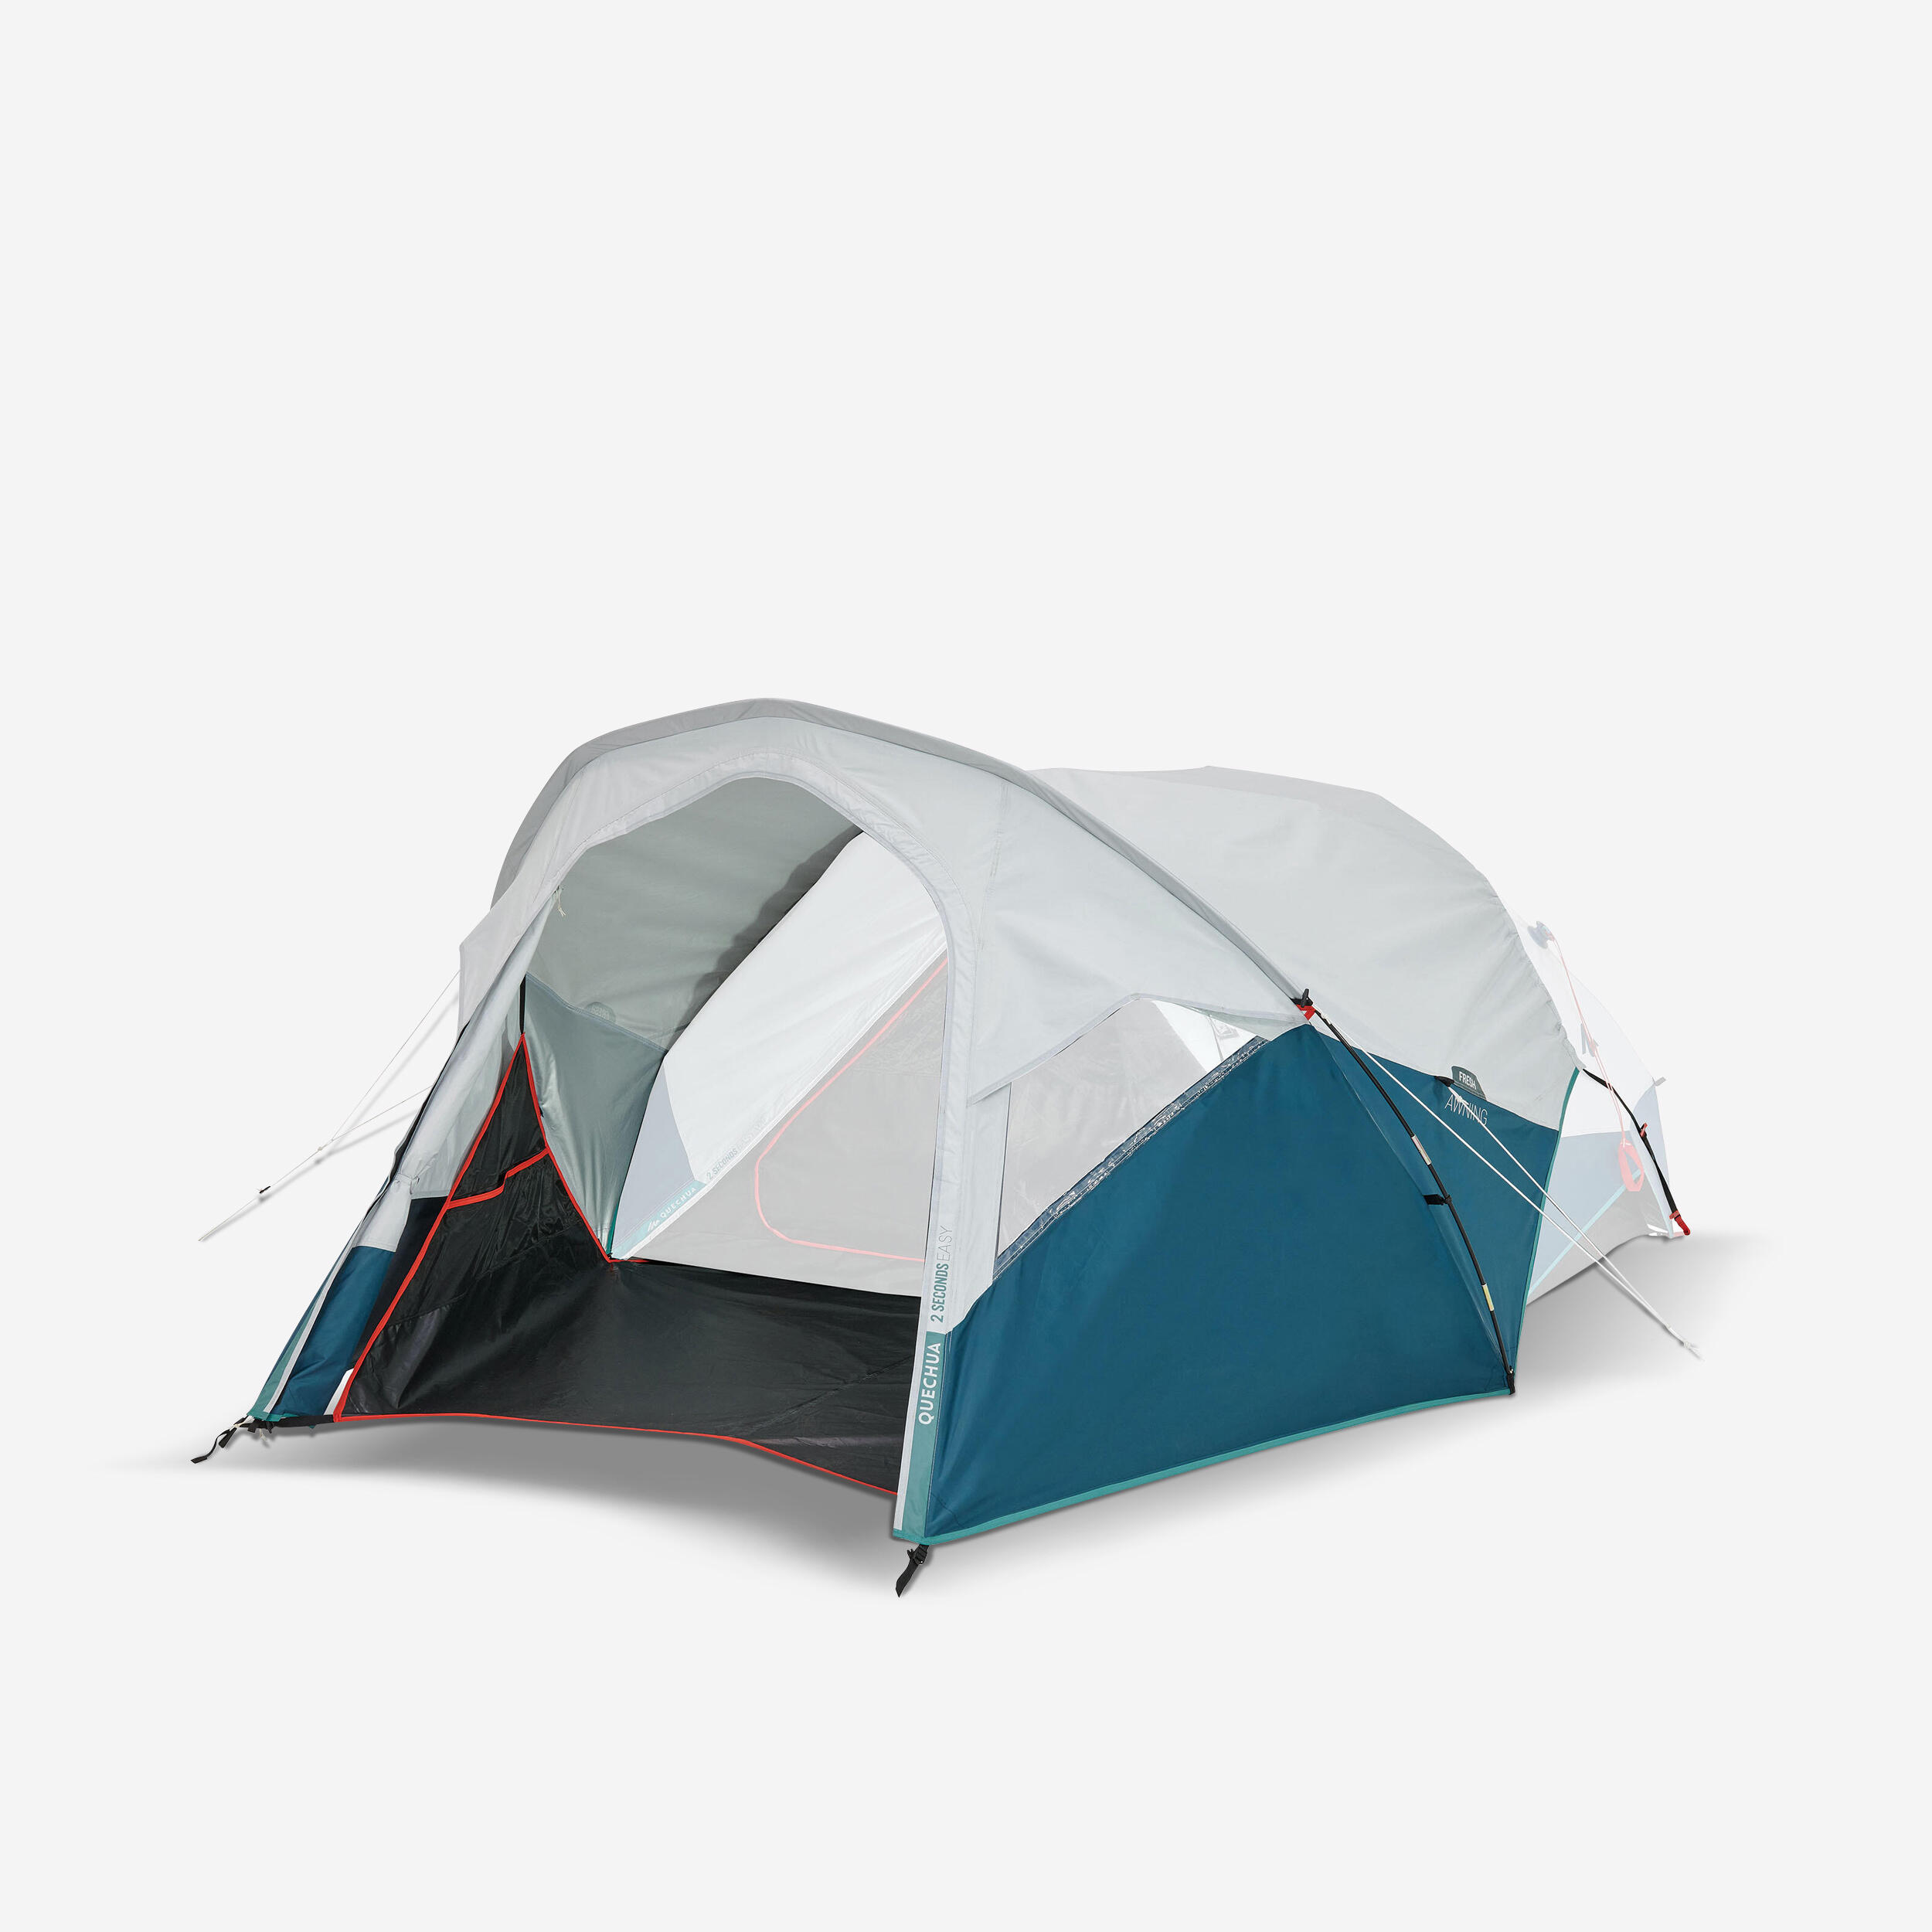 Camping awning - 2 Seconds EASY - Fresh 1/20